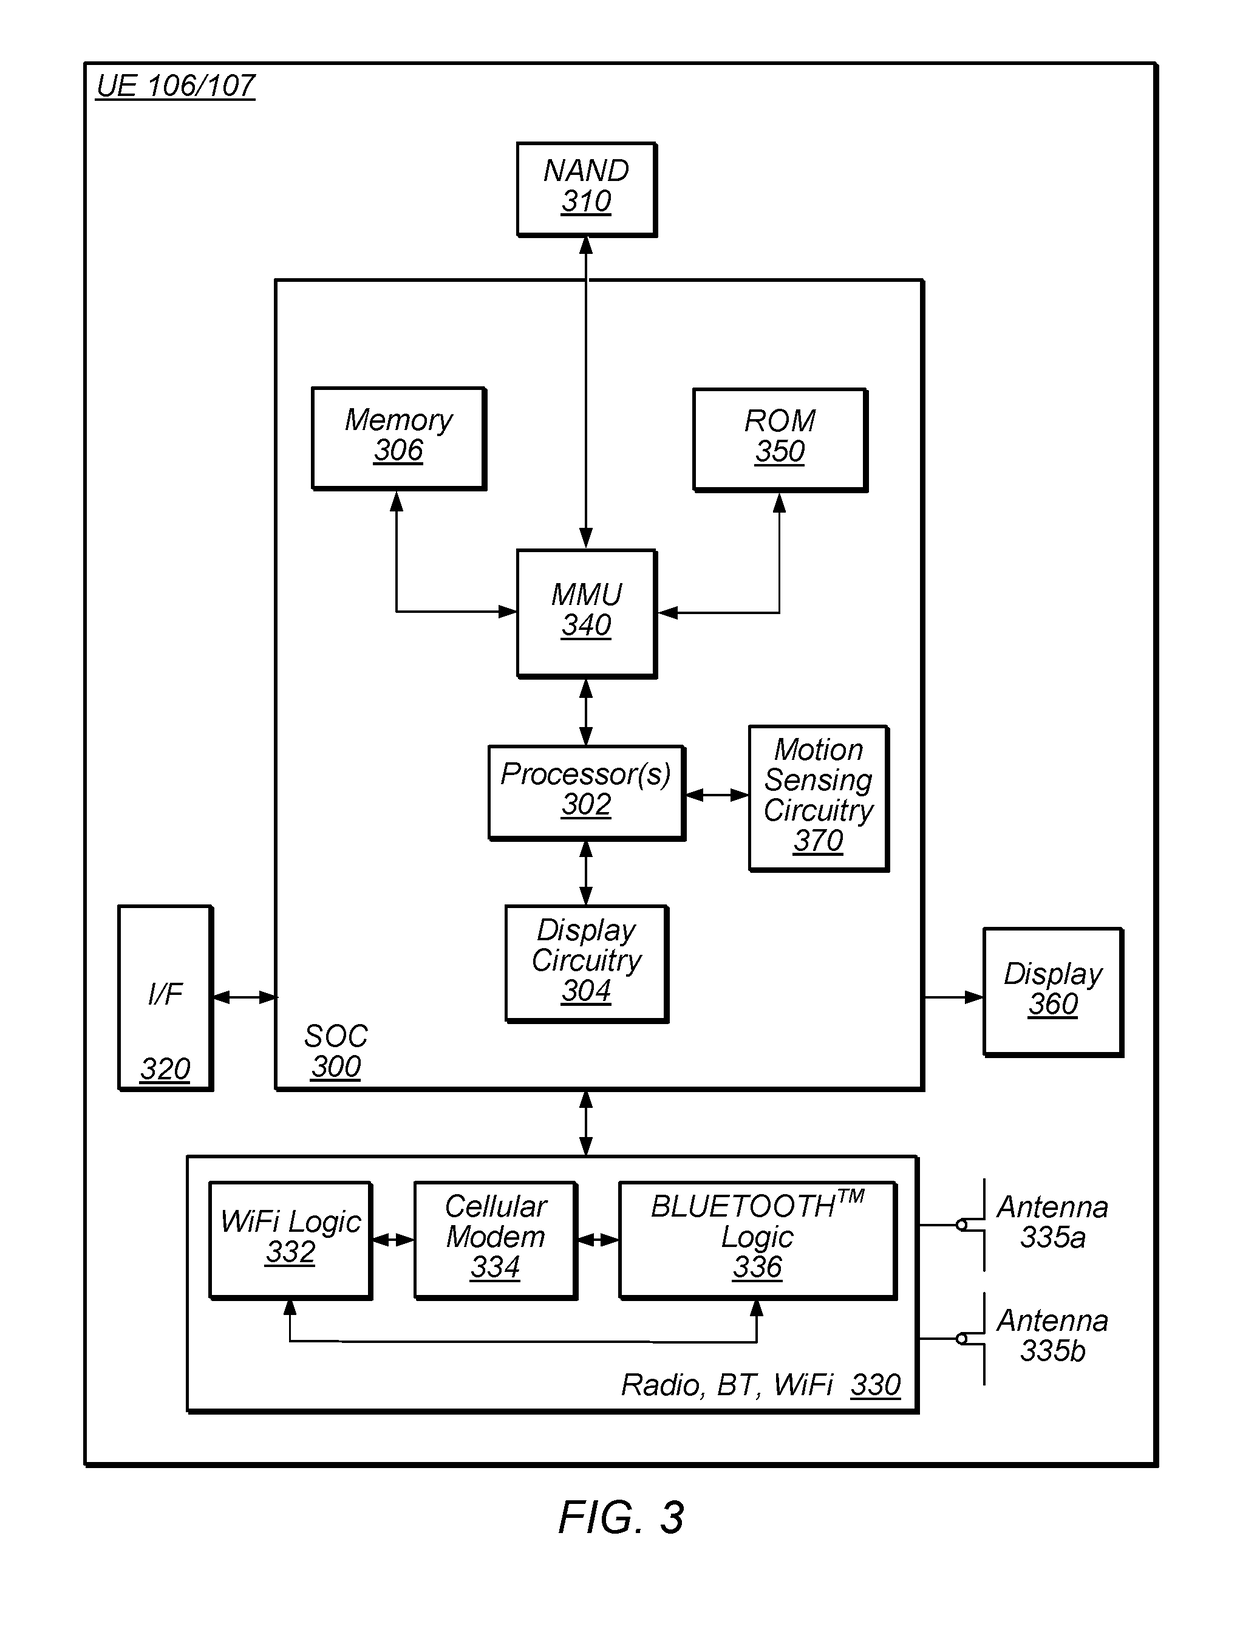 Fast Switching Between Control Channels During Radio Resource Control Connection